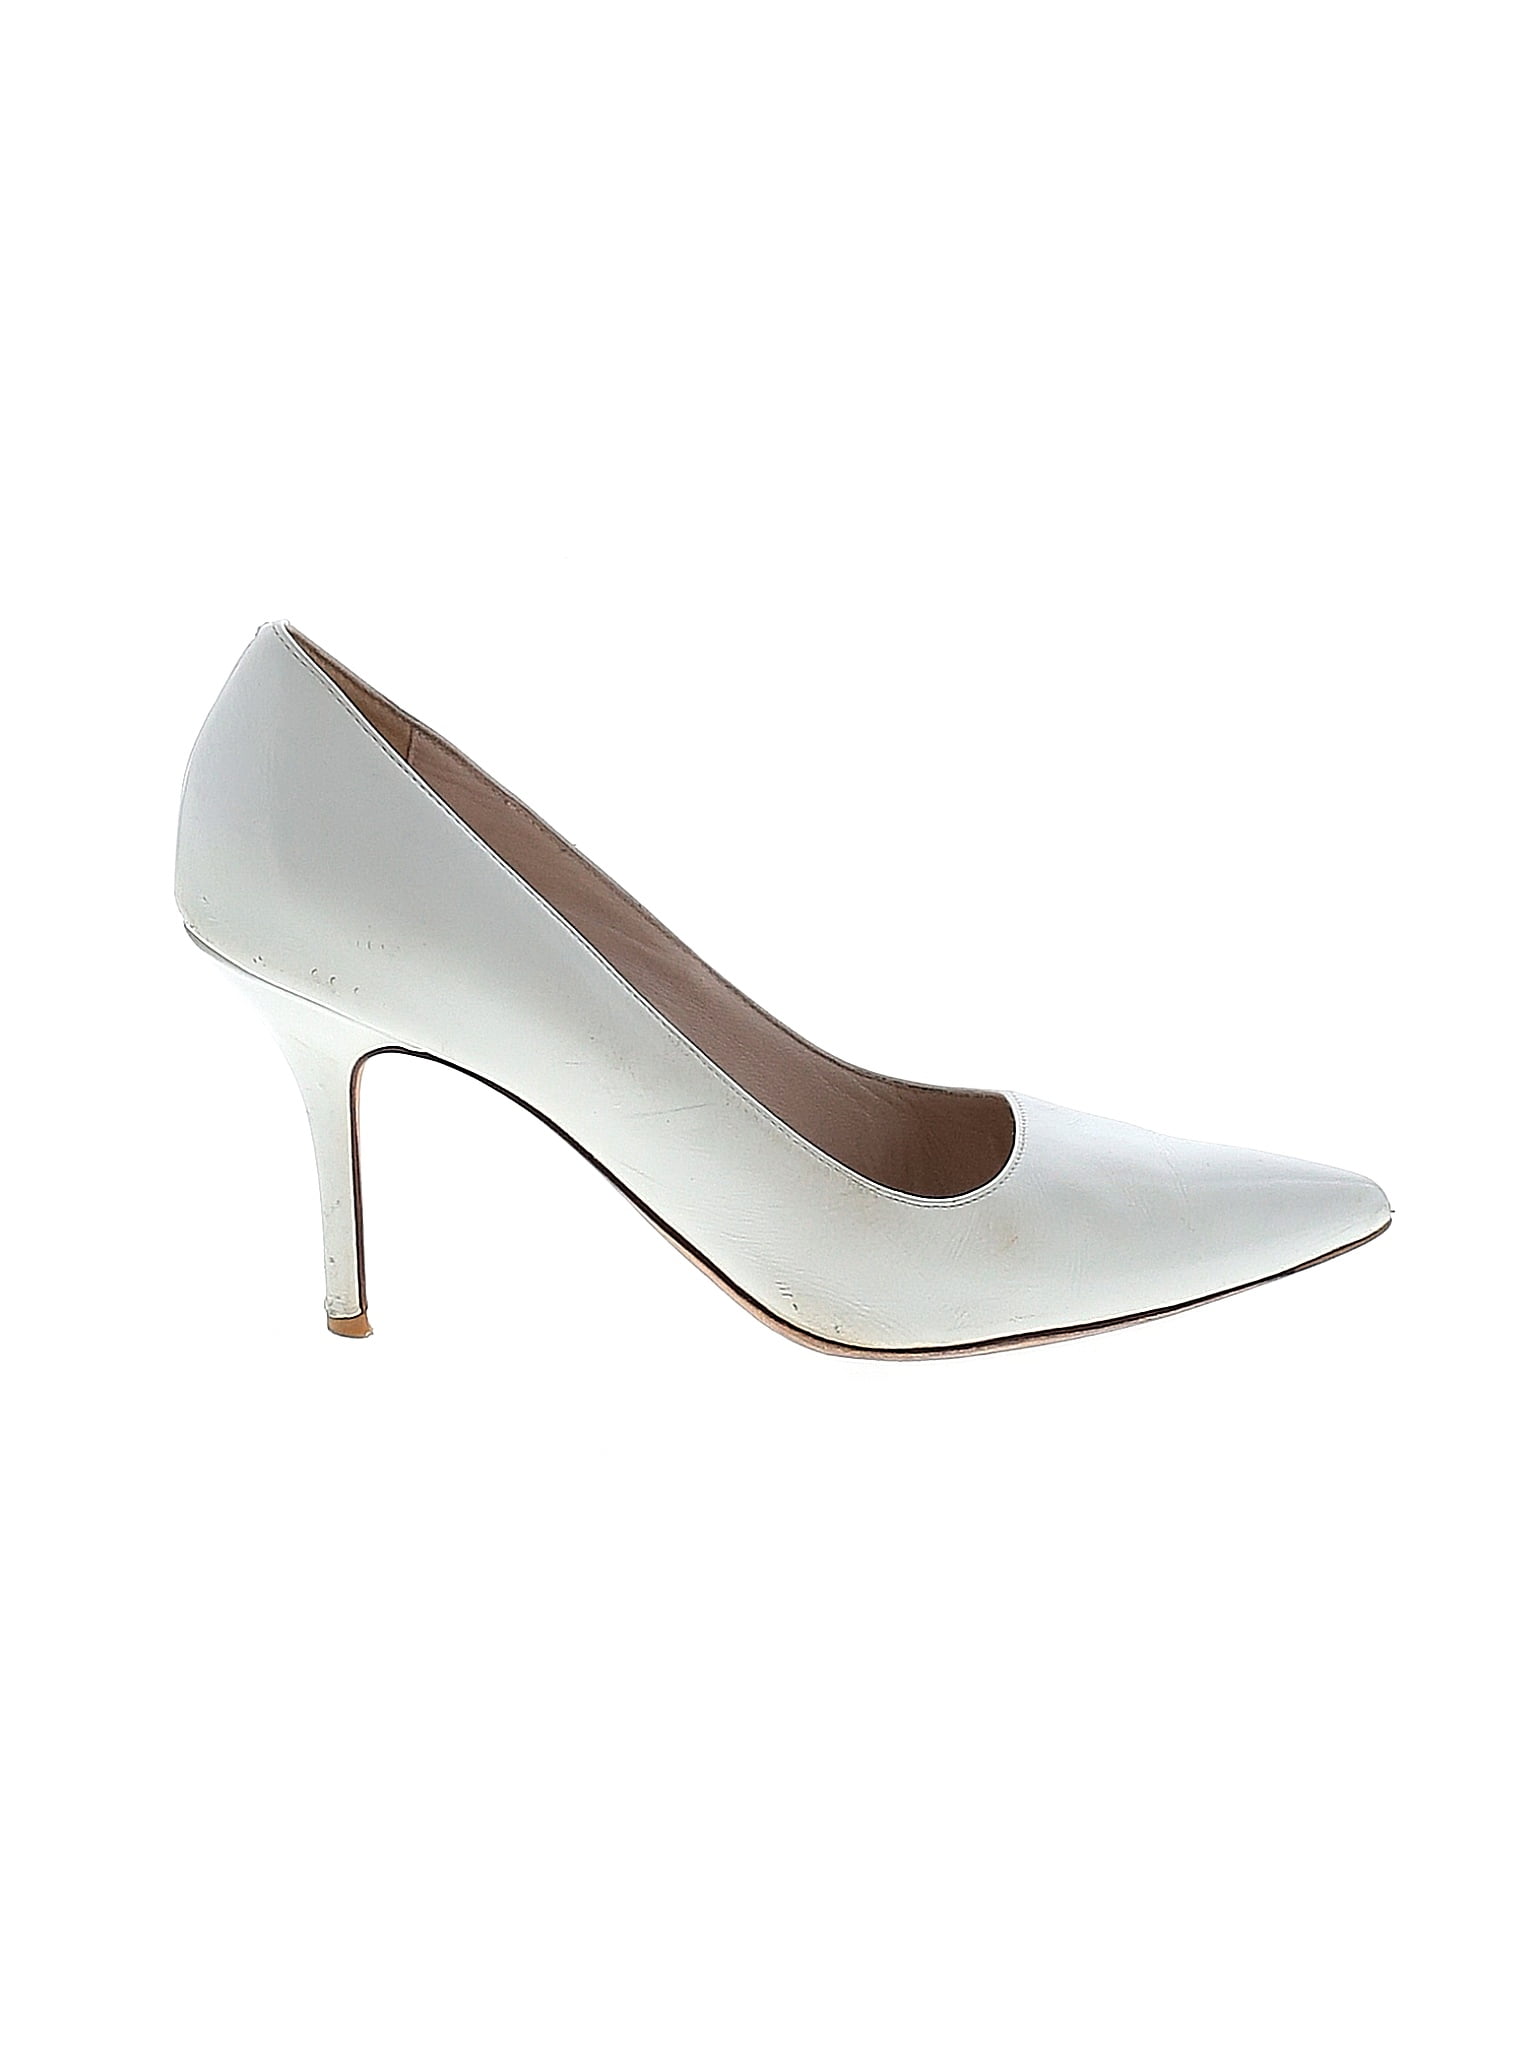 Cole Haan Solid White Ivory Heels Size 9 - 92% off | ThredUp